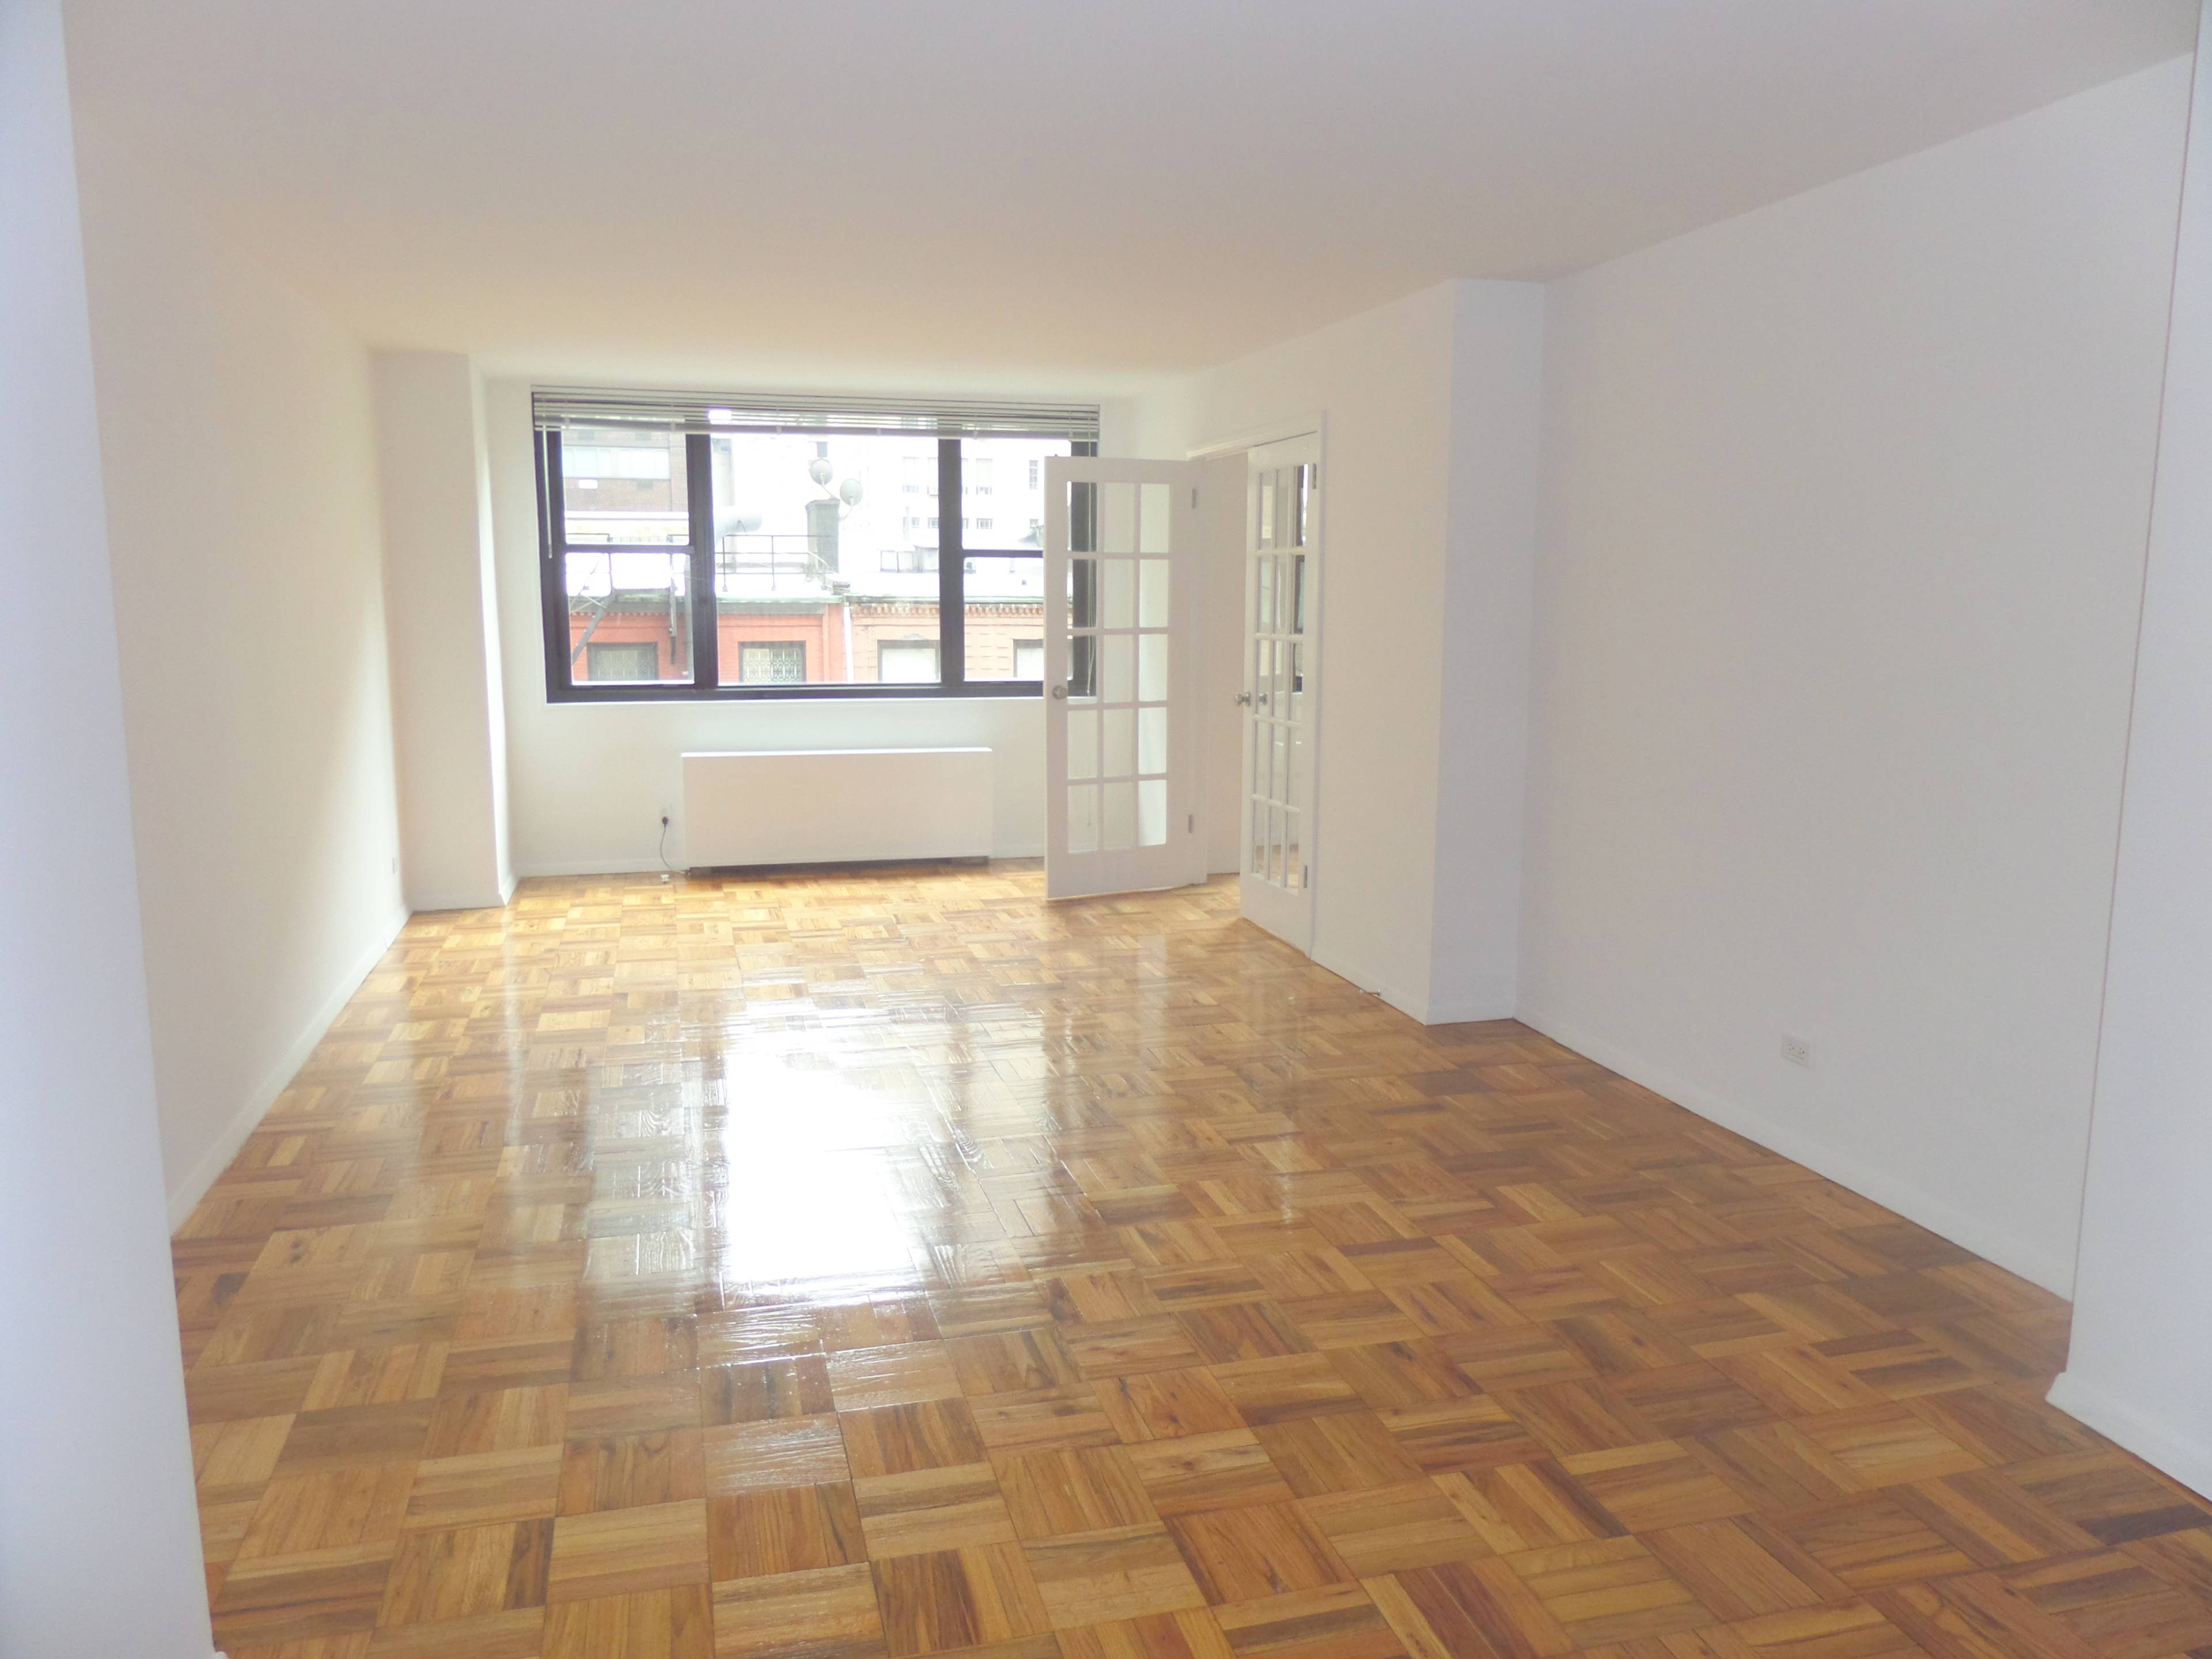 NO FEE CALL TODAY  Approx. 700 Sq. Ft., located in Midtown West/	Hell's Kitchen/Clinton area futures Central Air Conditioning, Hardwood Floors, French Doors, Granite Bathroom  Separate Kitchen, Southern Exposure, Great closets spaces